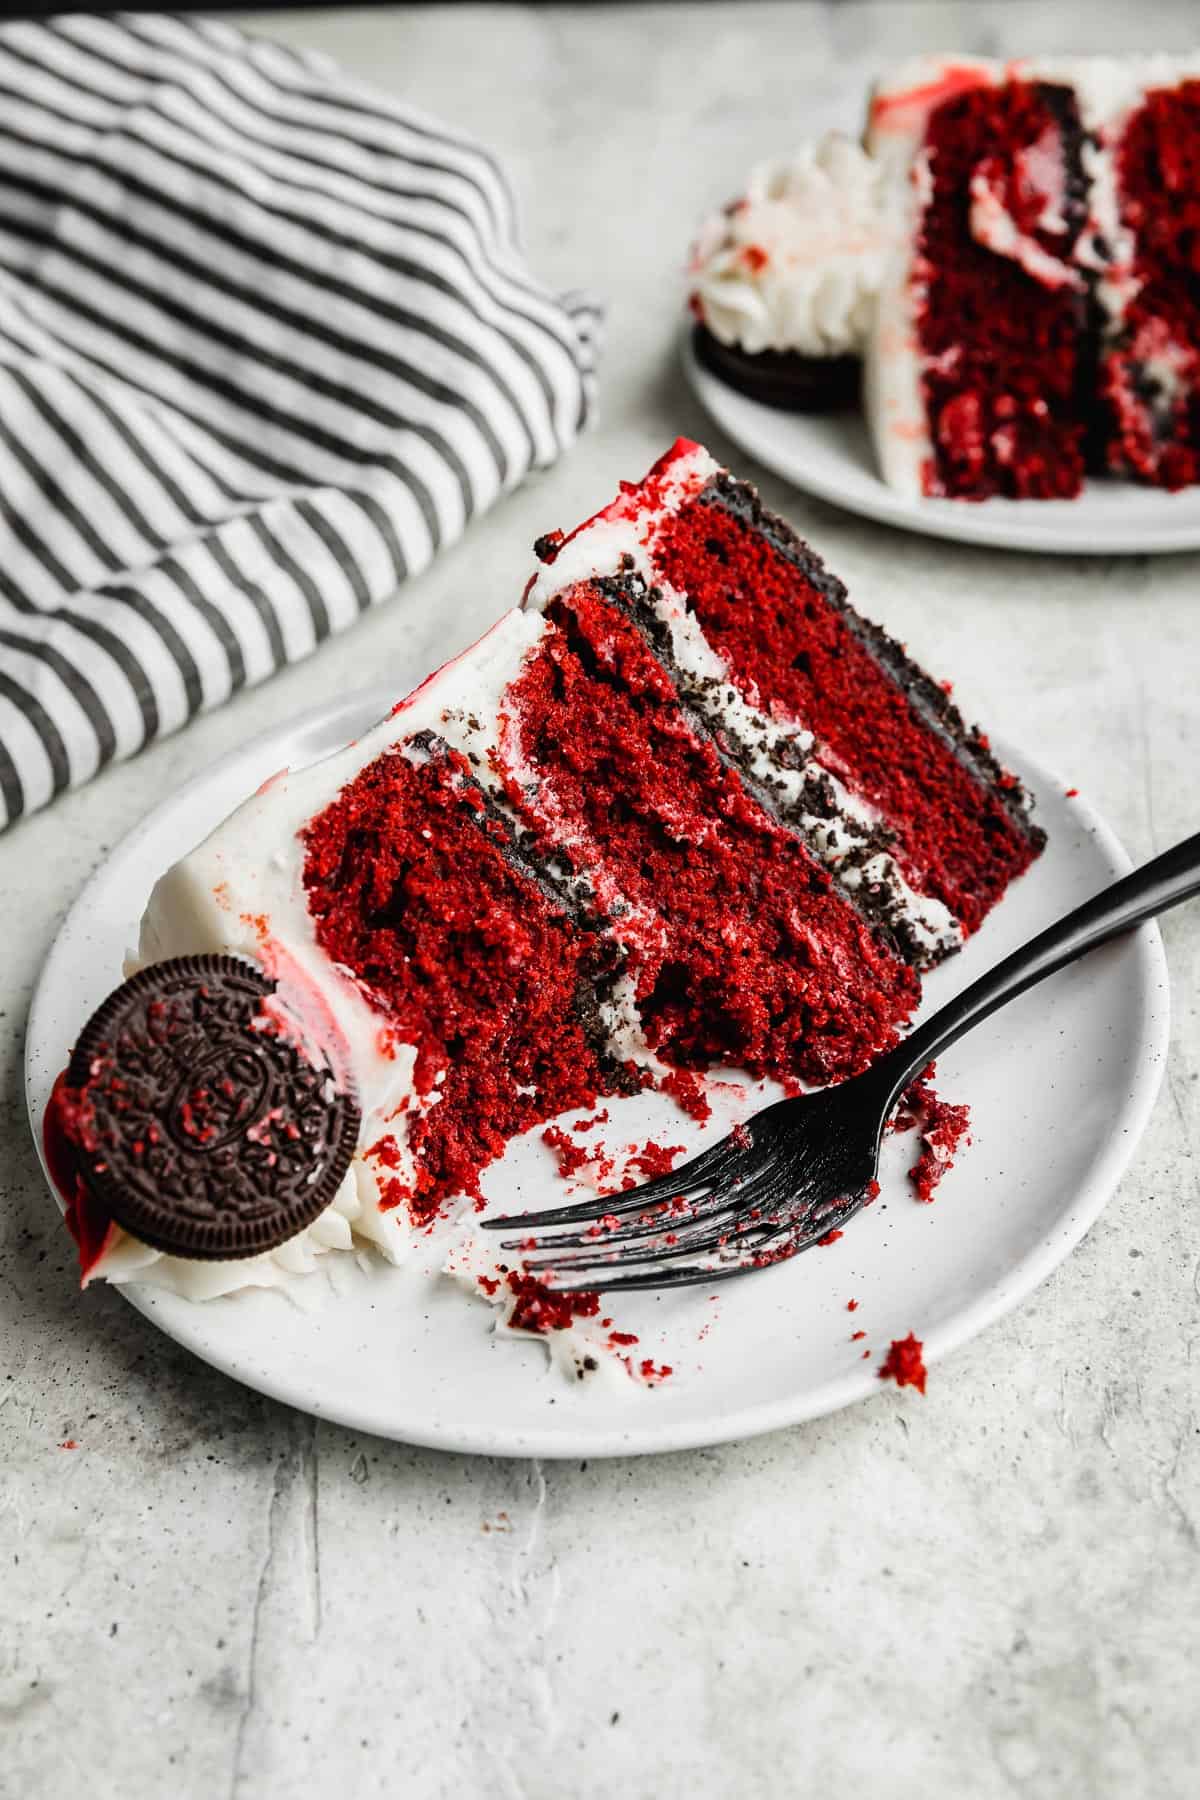 A slice of Oreo Red Velvet Cake on a white plate with a black fork next to it.